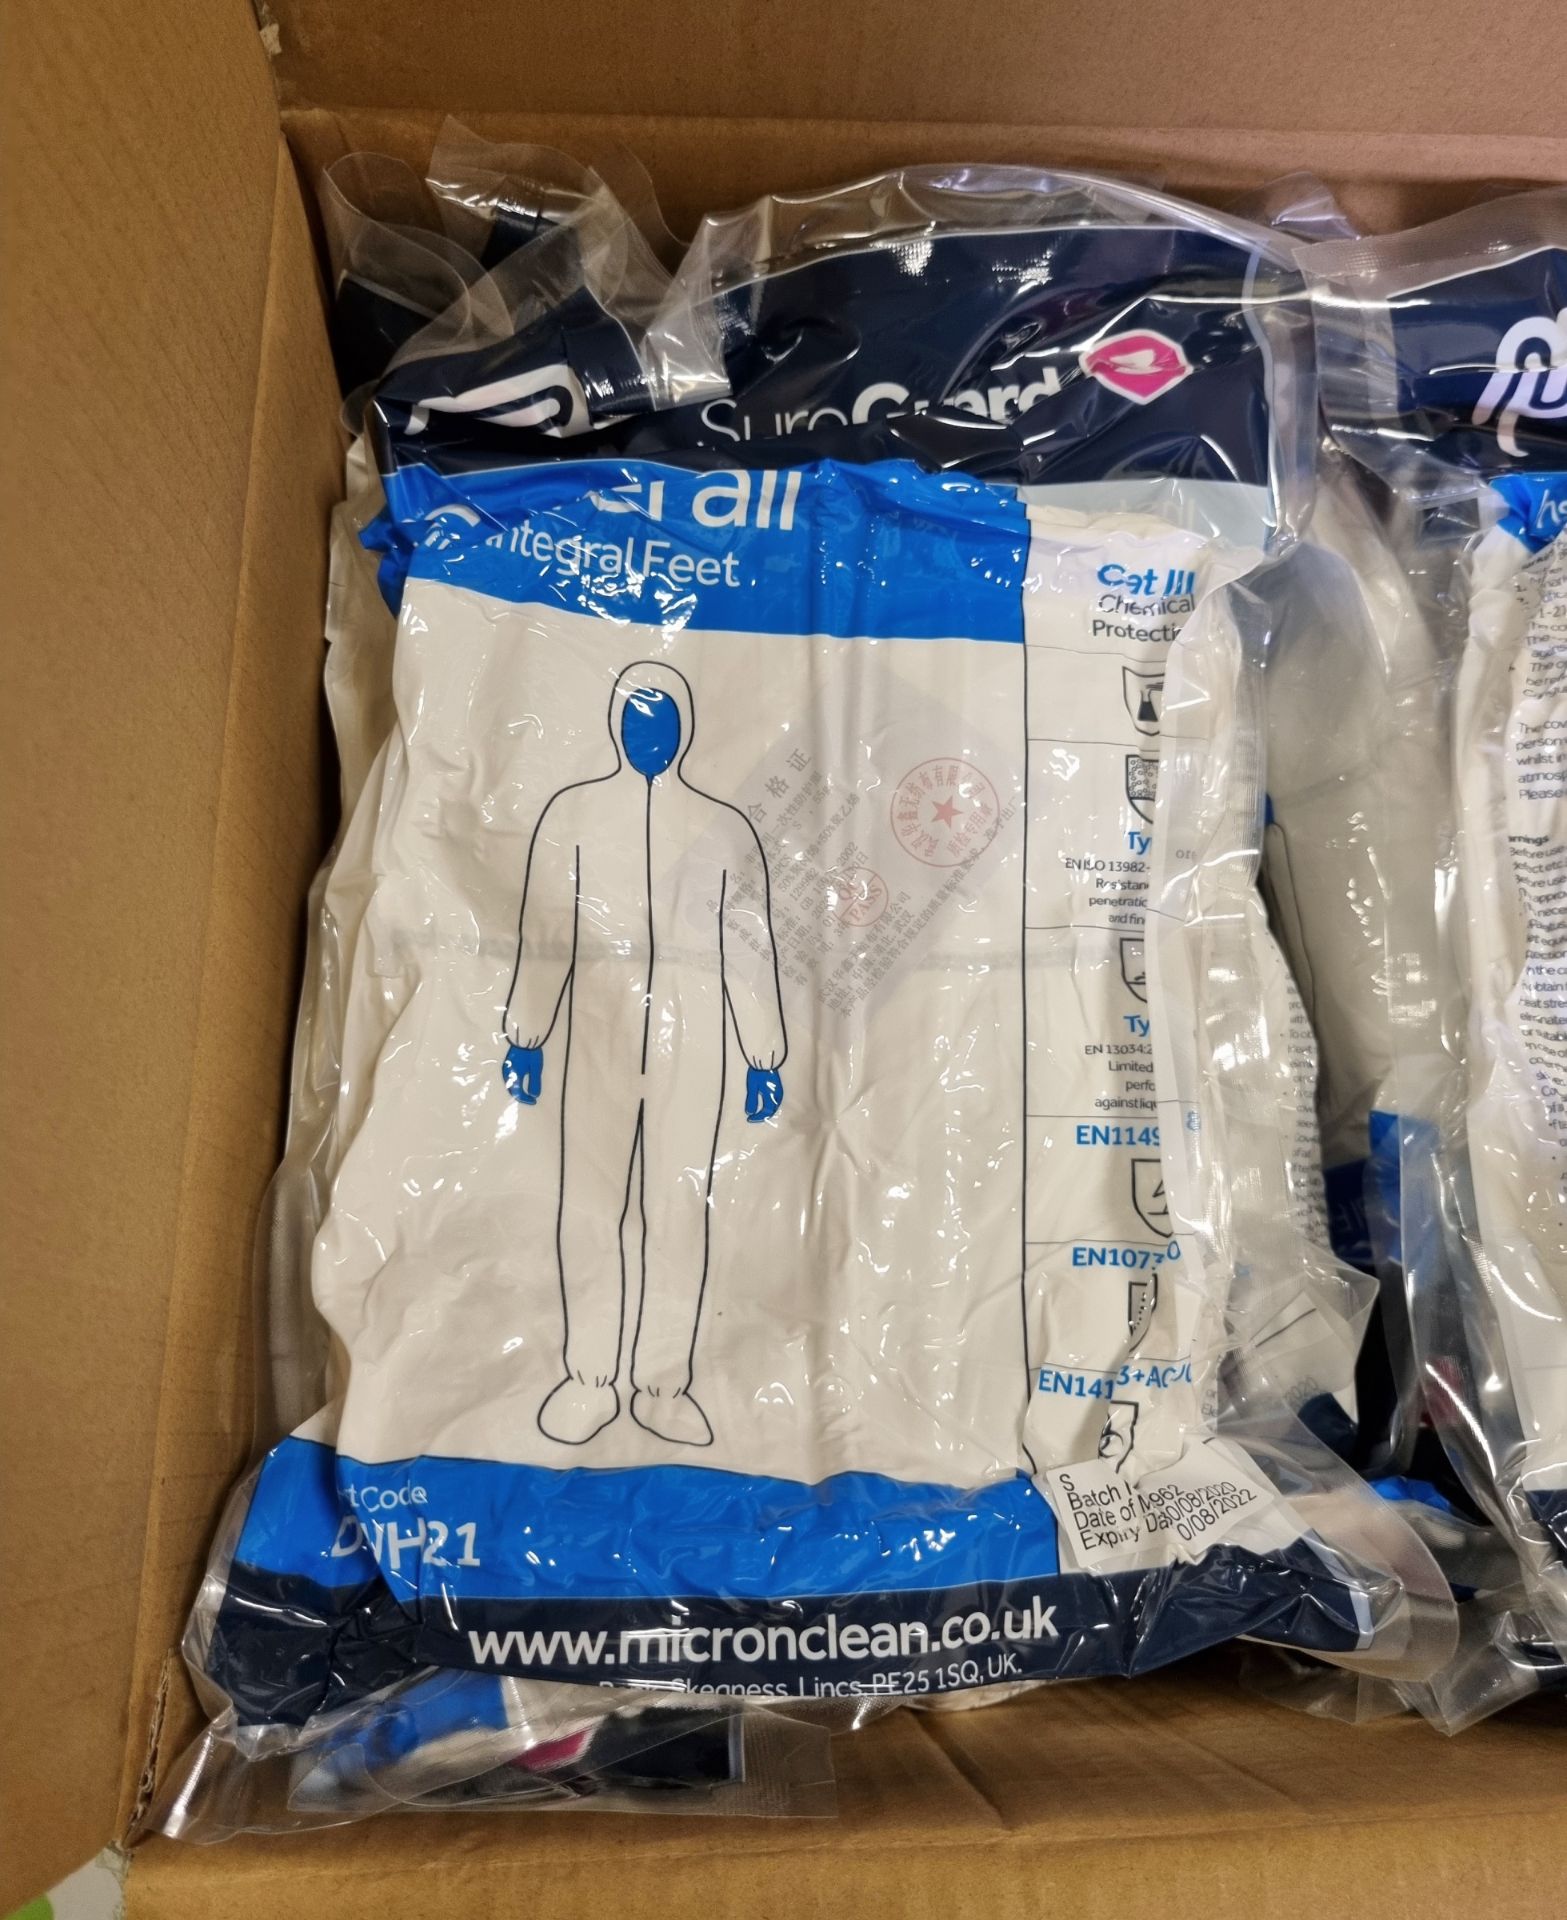 2x boxes of MicroClean SureGuard 3 - size small coverall with integral feet - 25 units per box - Image 4 of 5